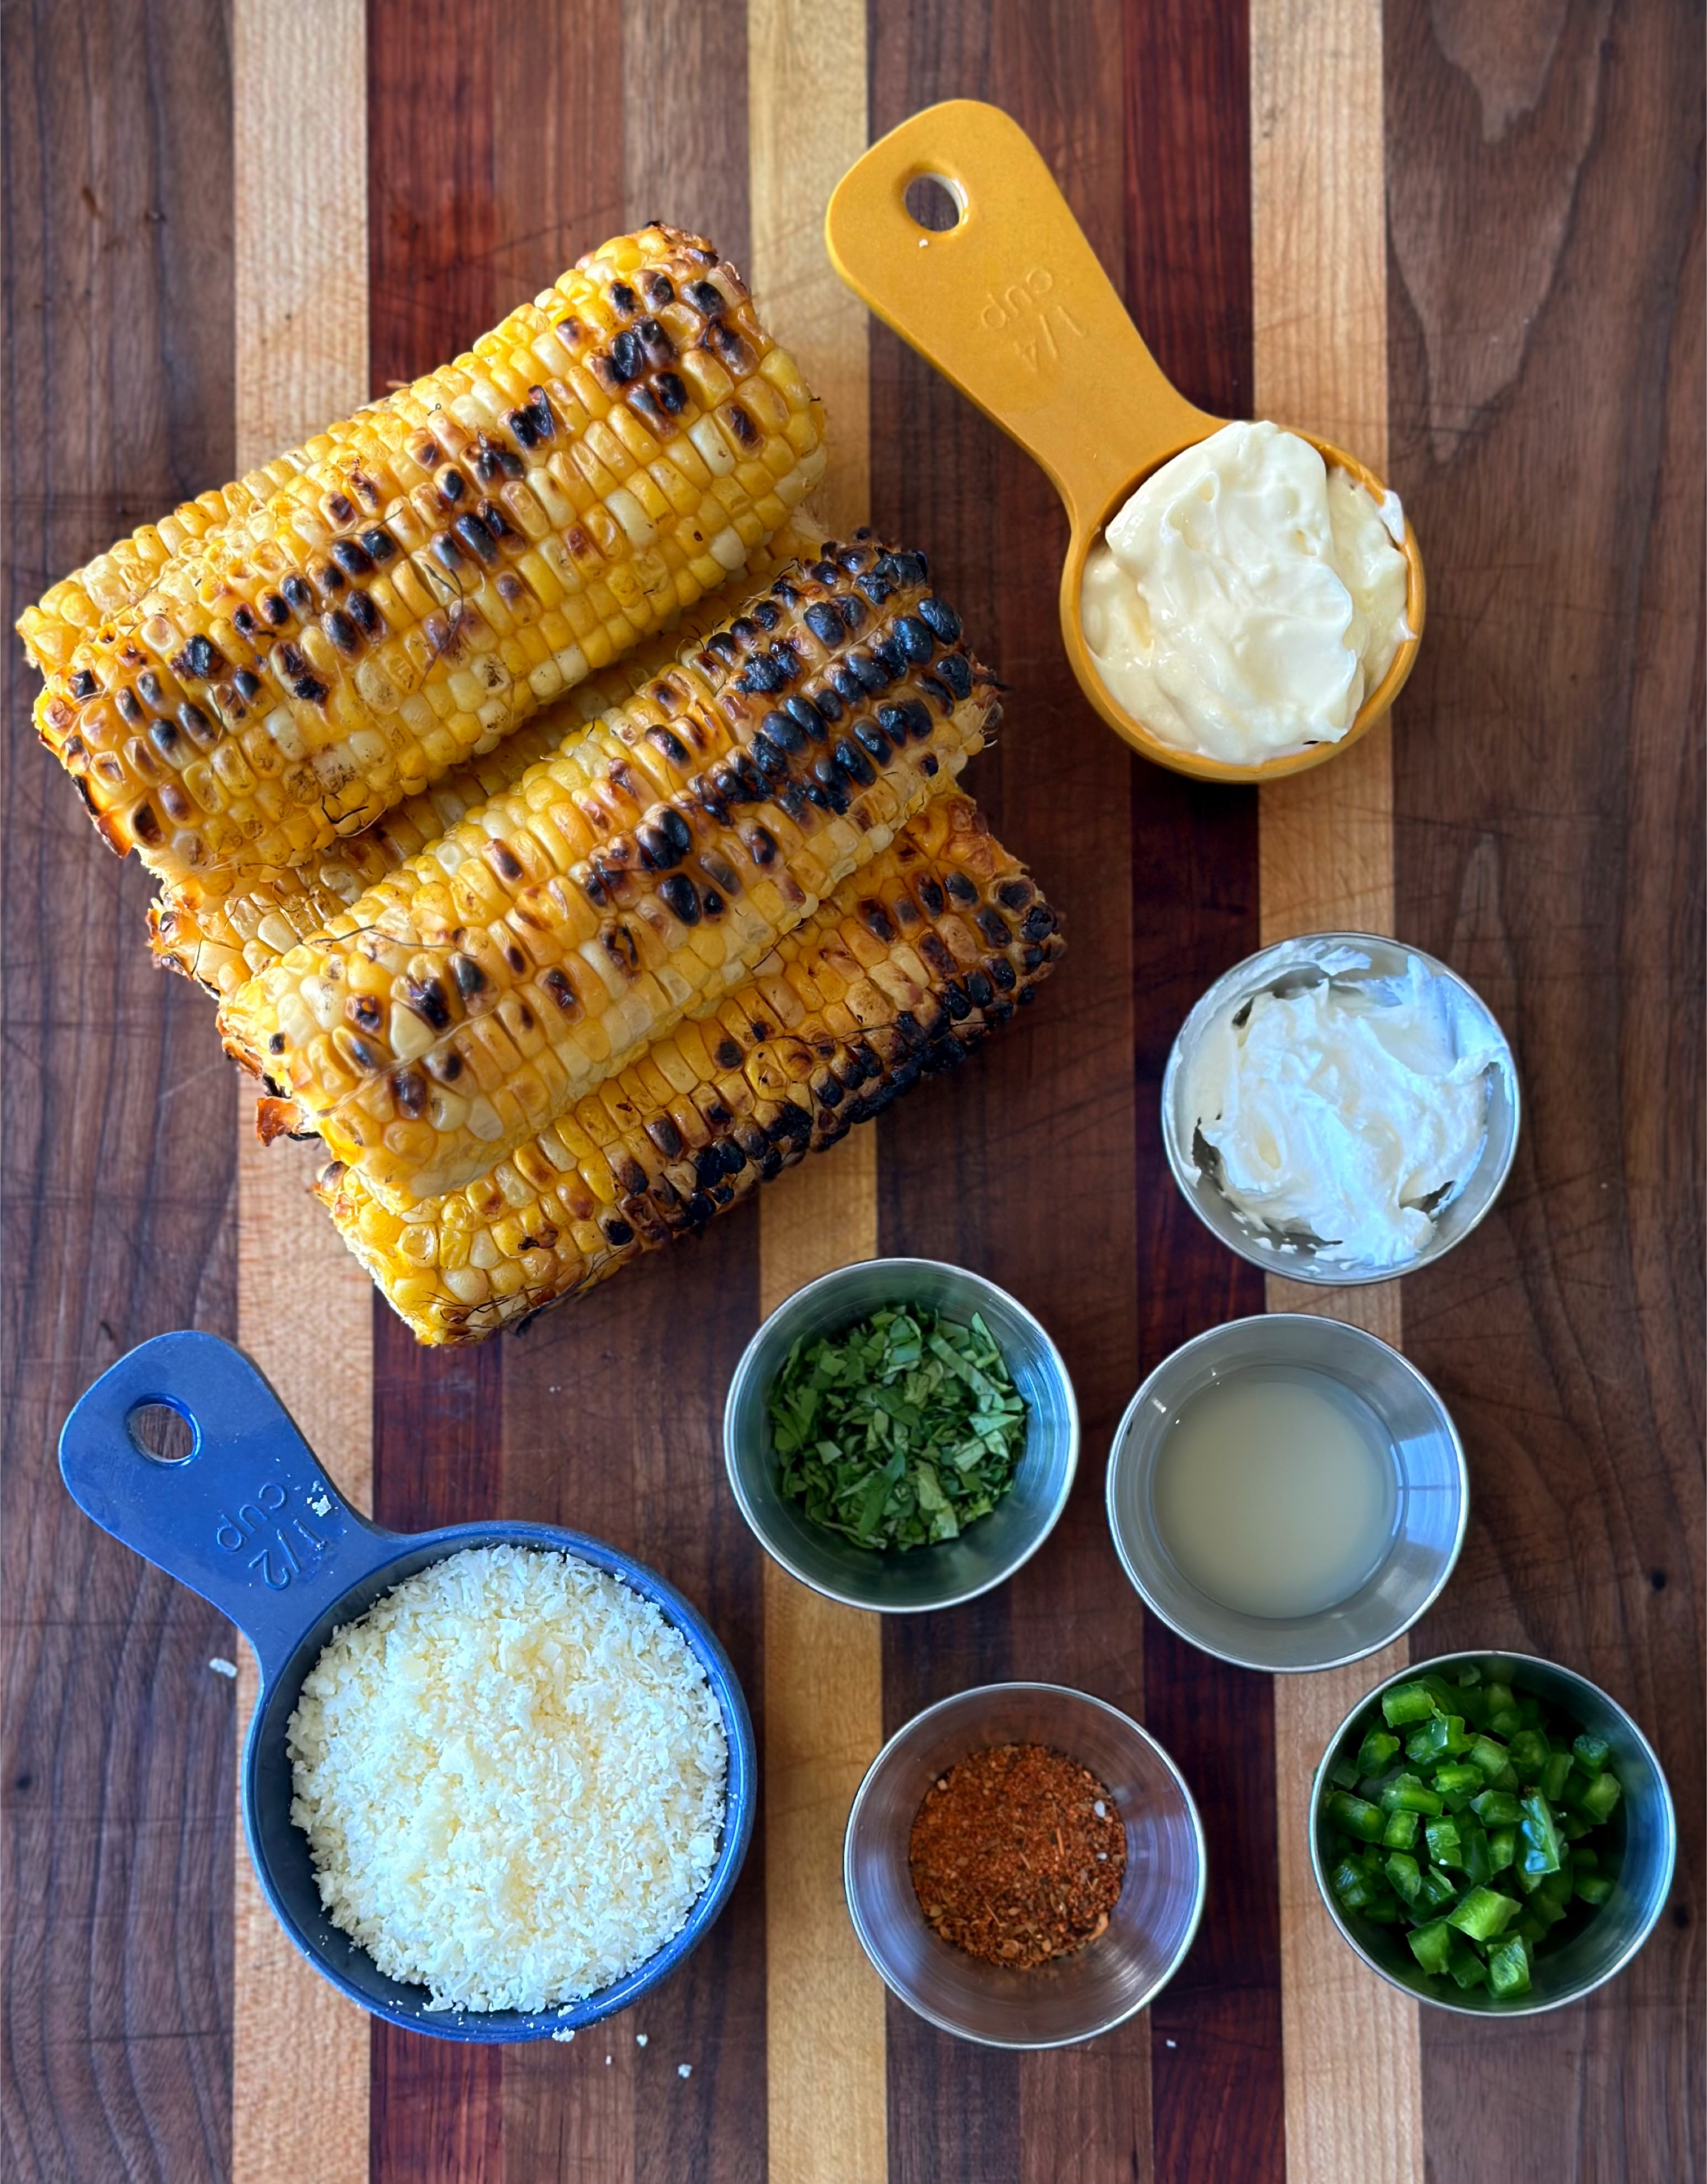 Visual image of all ingredients needed for Mexican street corn dip